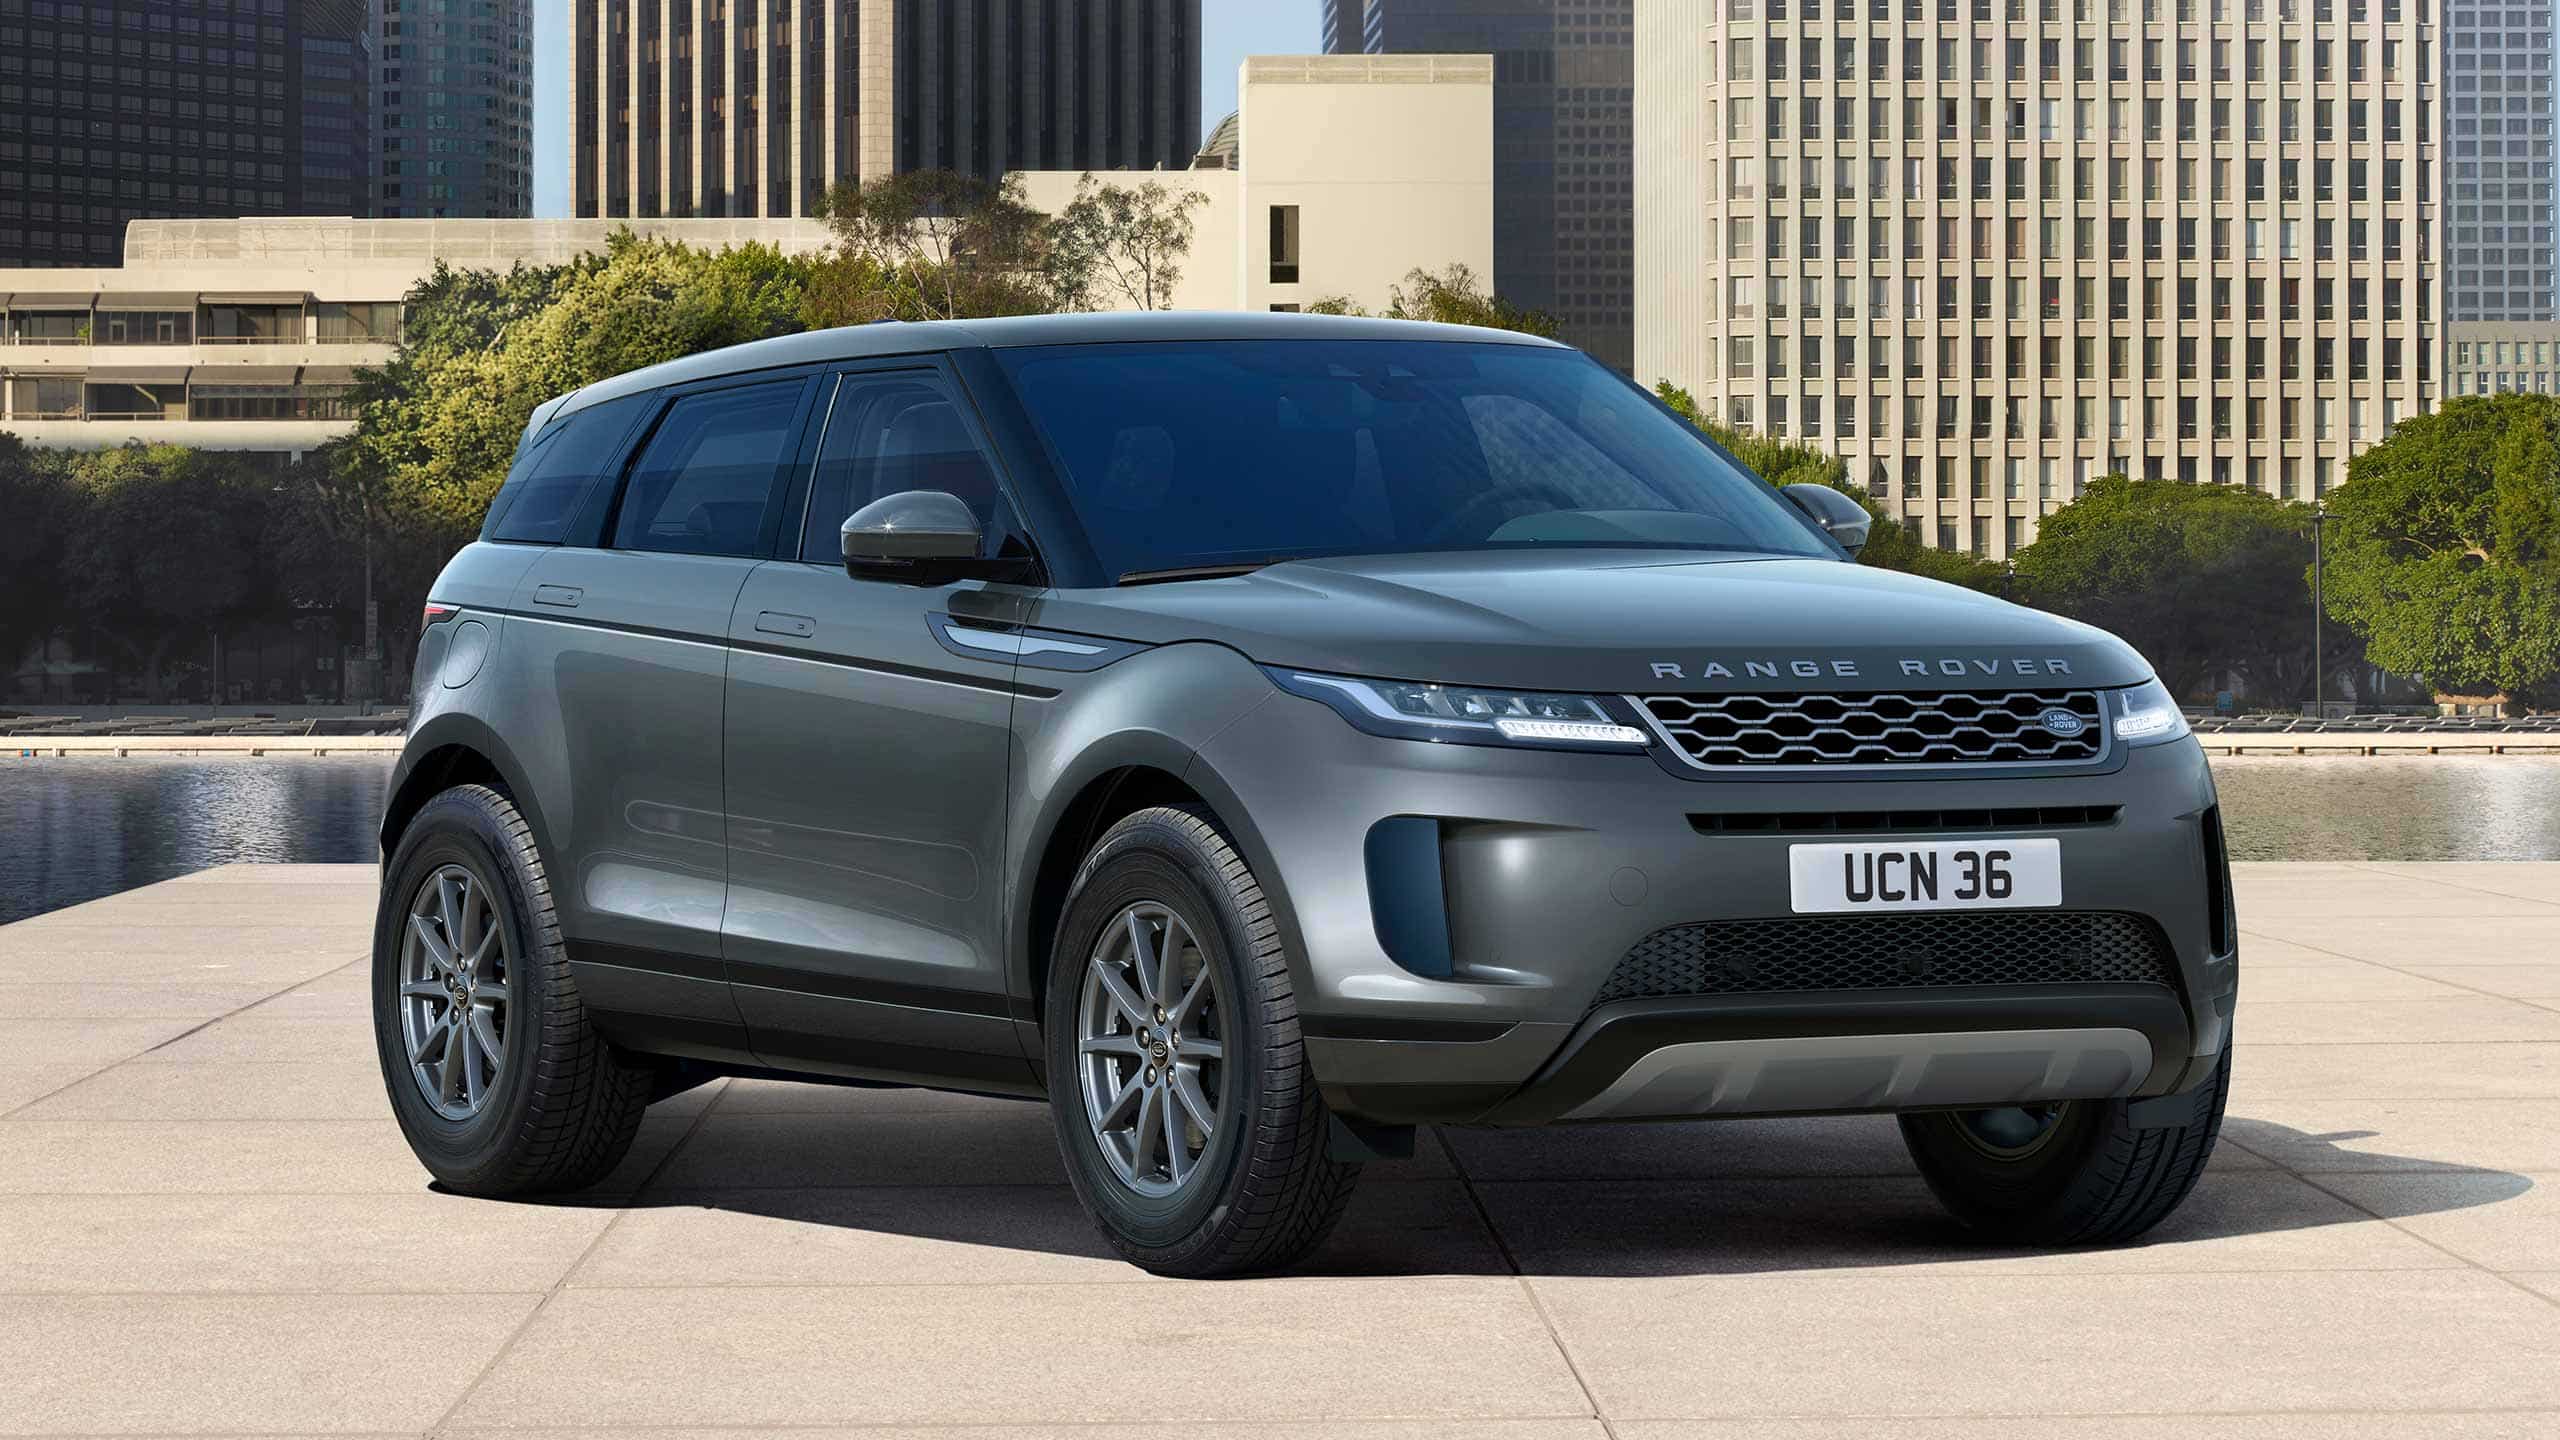 Evoque S, SE, HSE Limited Editions Range Rover